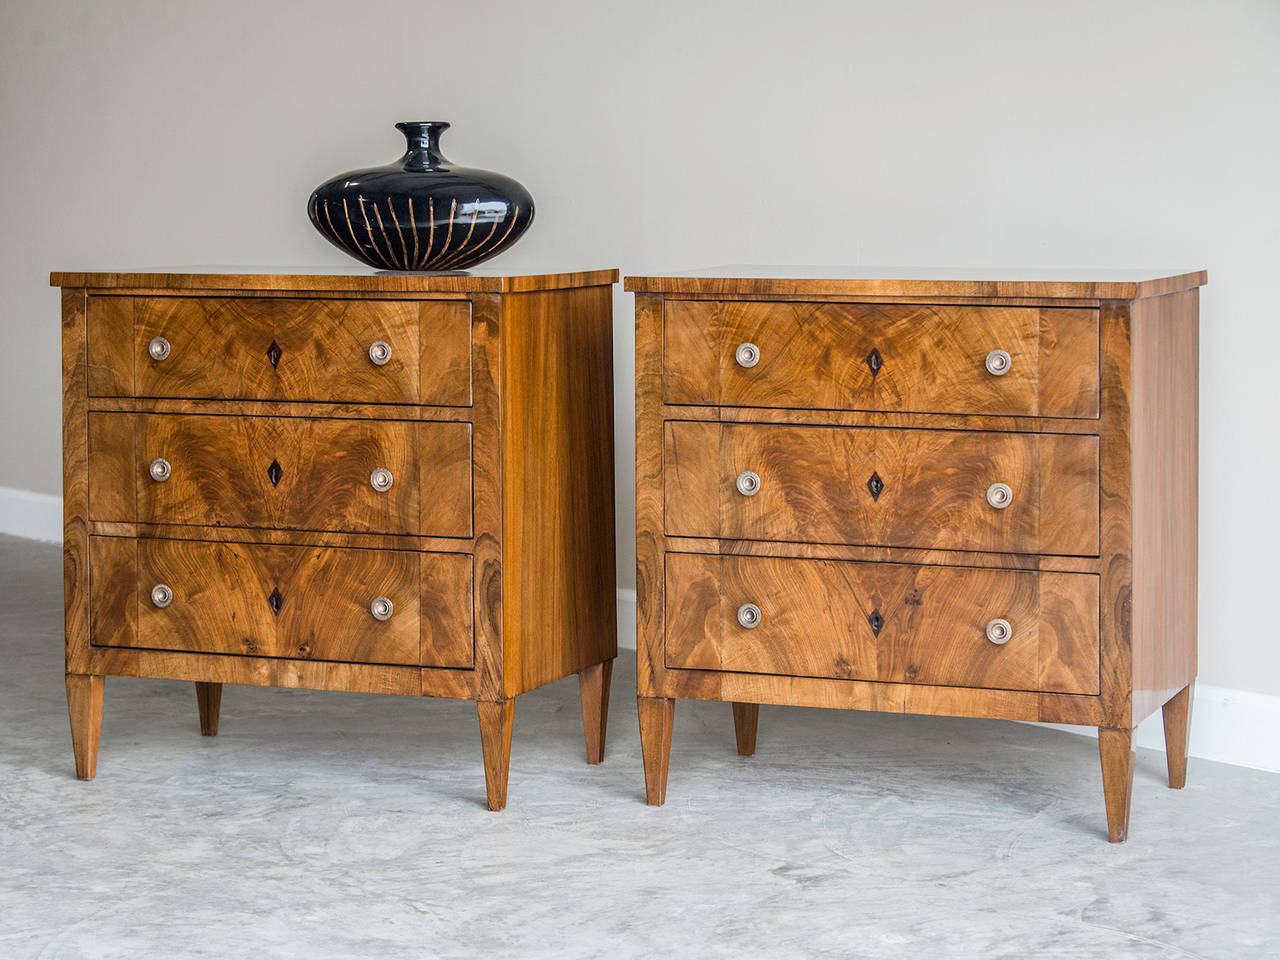 Pair of Biedermeier Style Matched Walnut Chests, Austria c. 1900. These handsome chests are notable for the exceptional quality of the matched walnut panels featured on both the tops and the entire front façade. The elegant simplicity of the